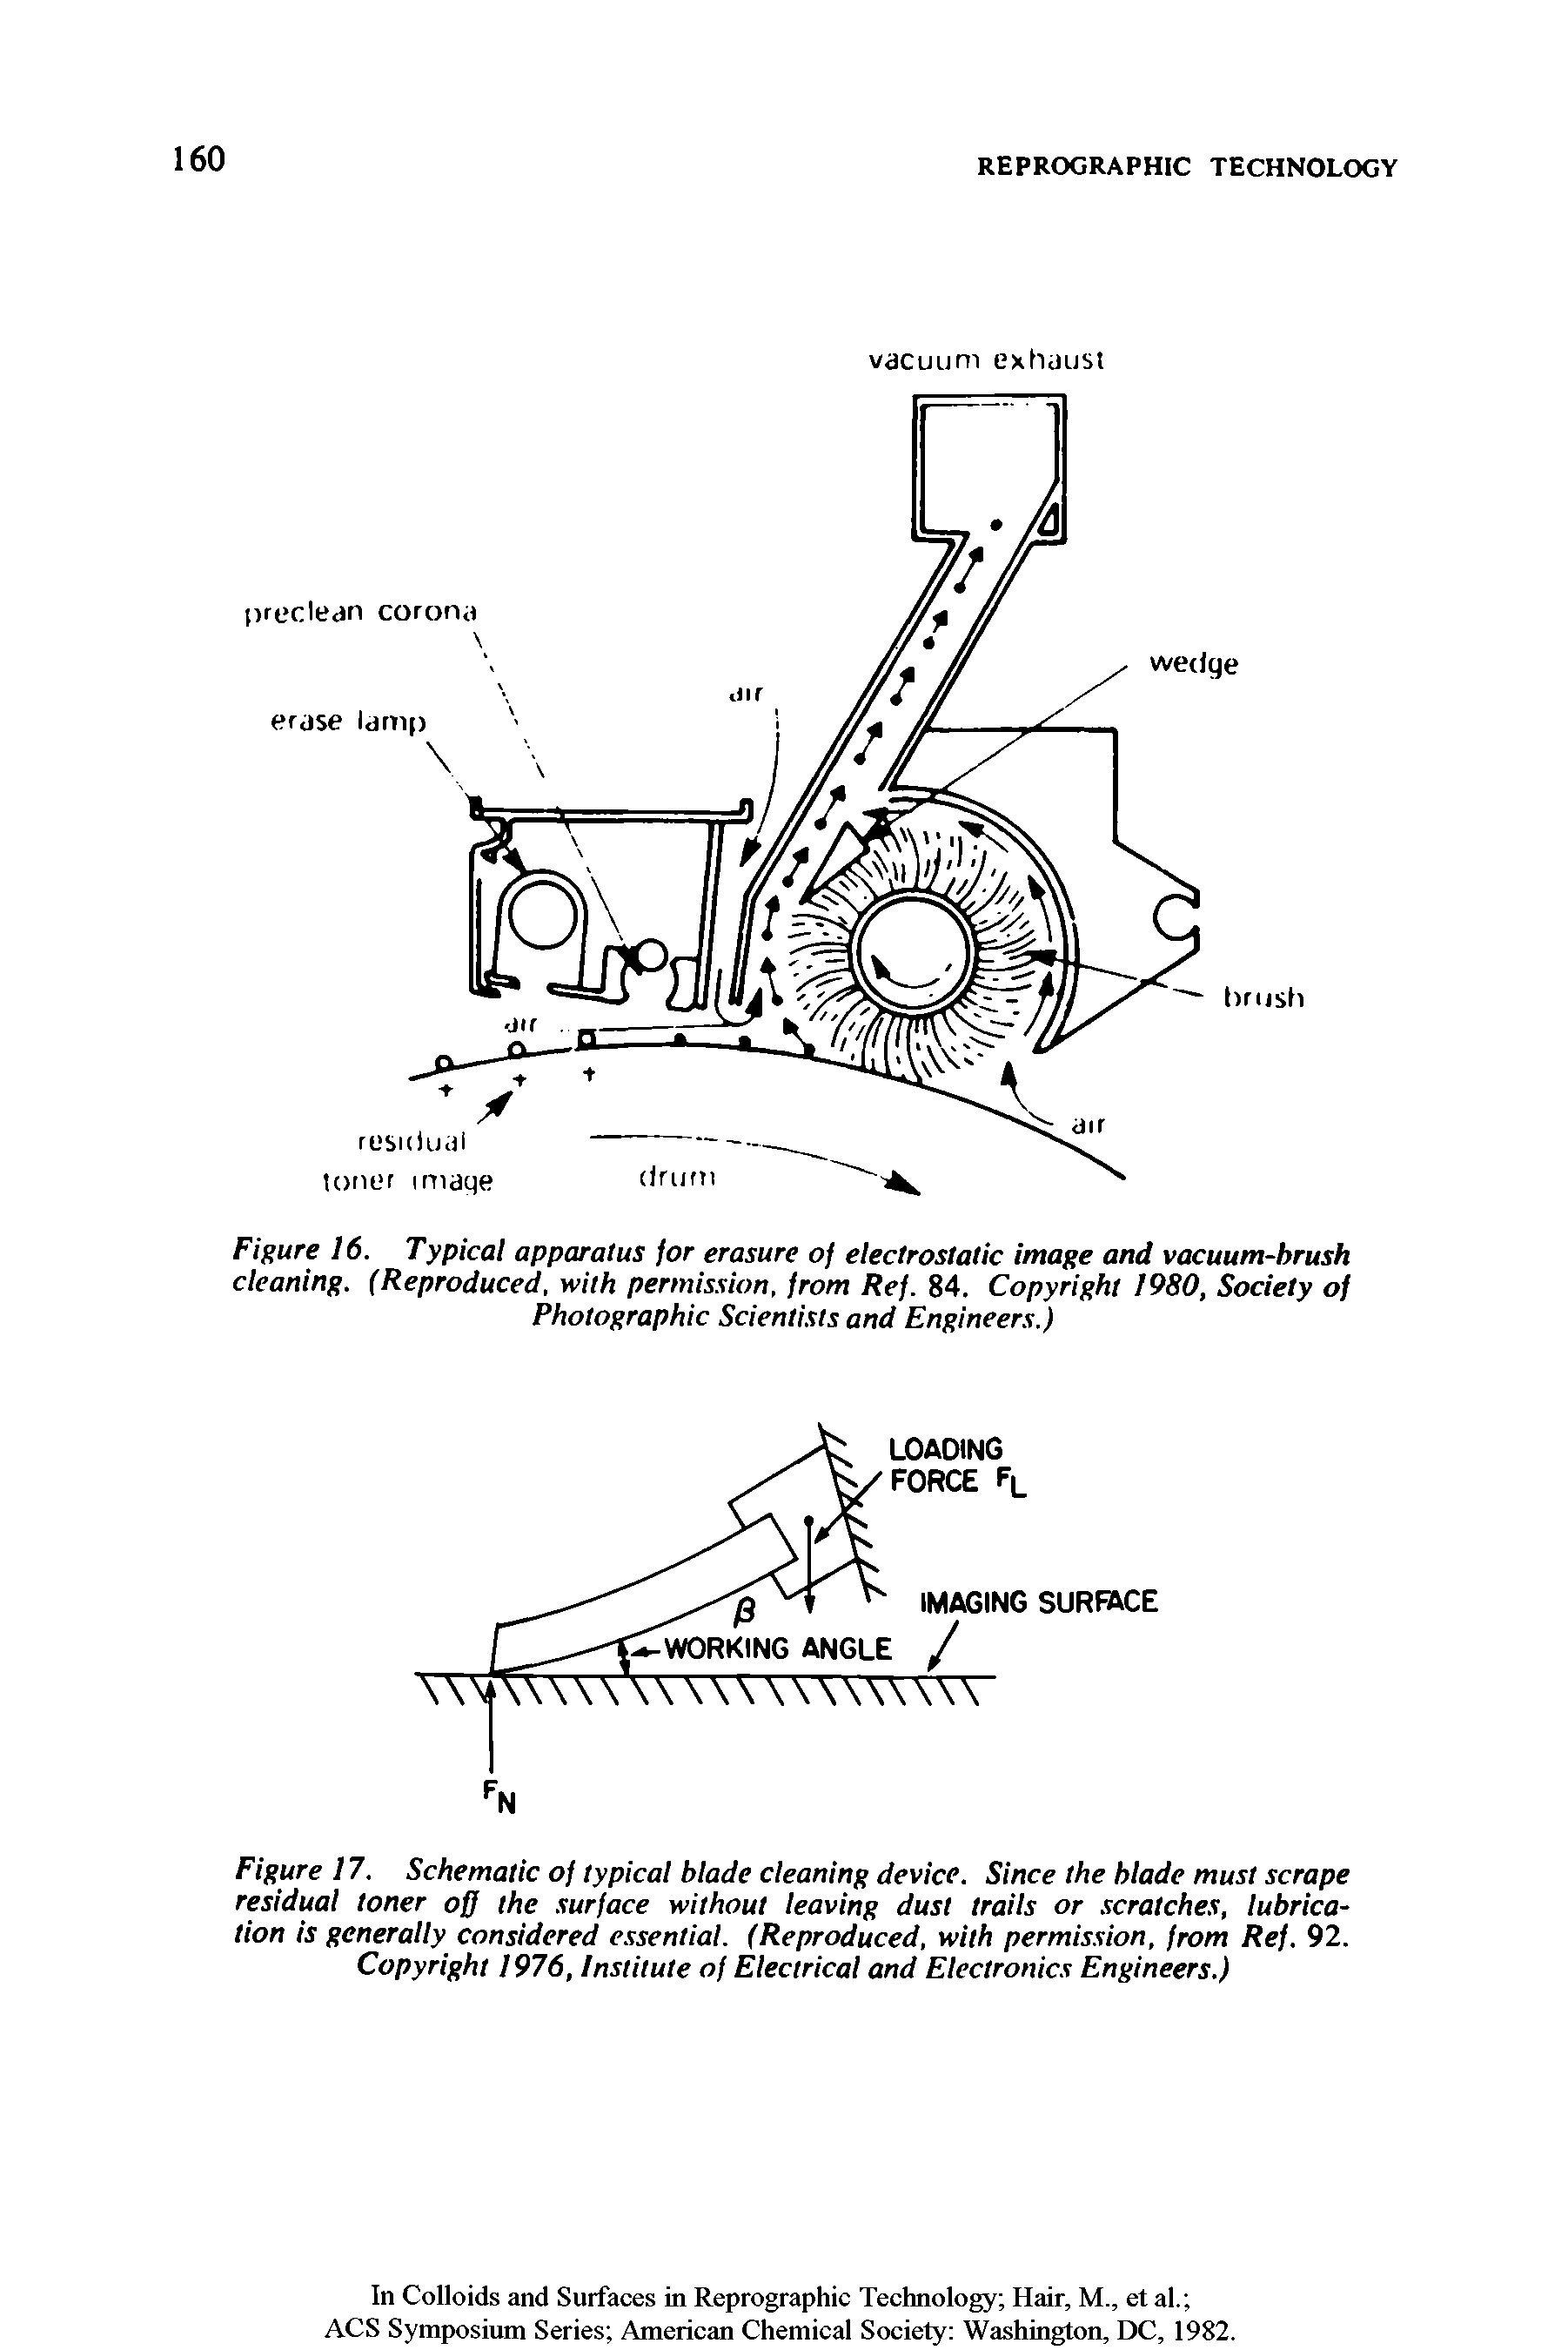 Figure 16. Typical apparatus for erasure of electrostatic image and vacuum-brush cleaning. (Reproduced, with permission, from Ref. 84. Copyright 1980, Society of Photographic Scientists and Engineers.)...